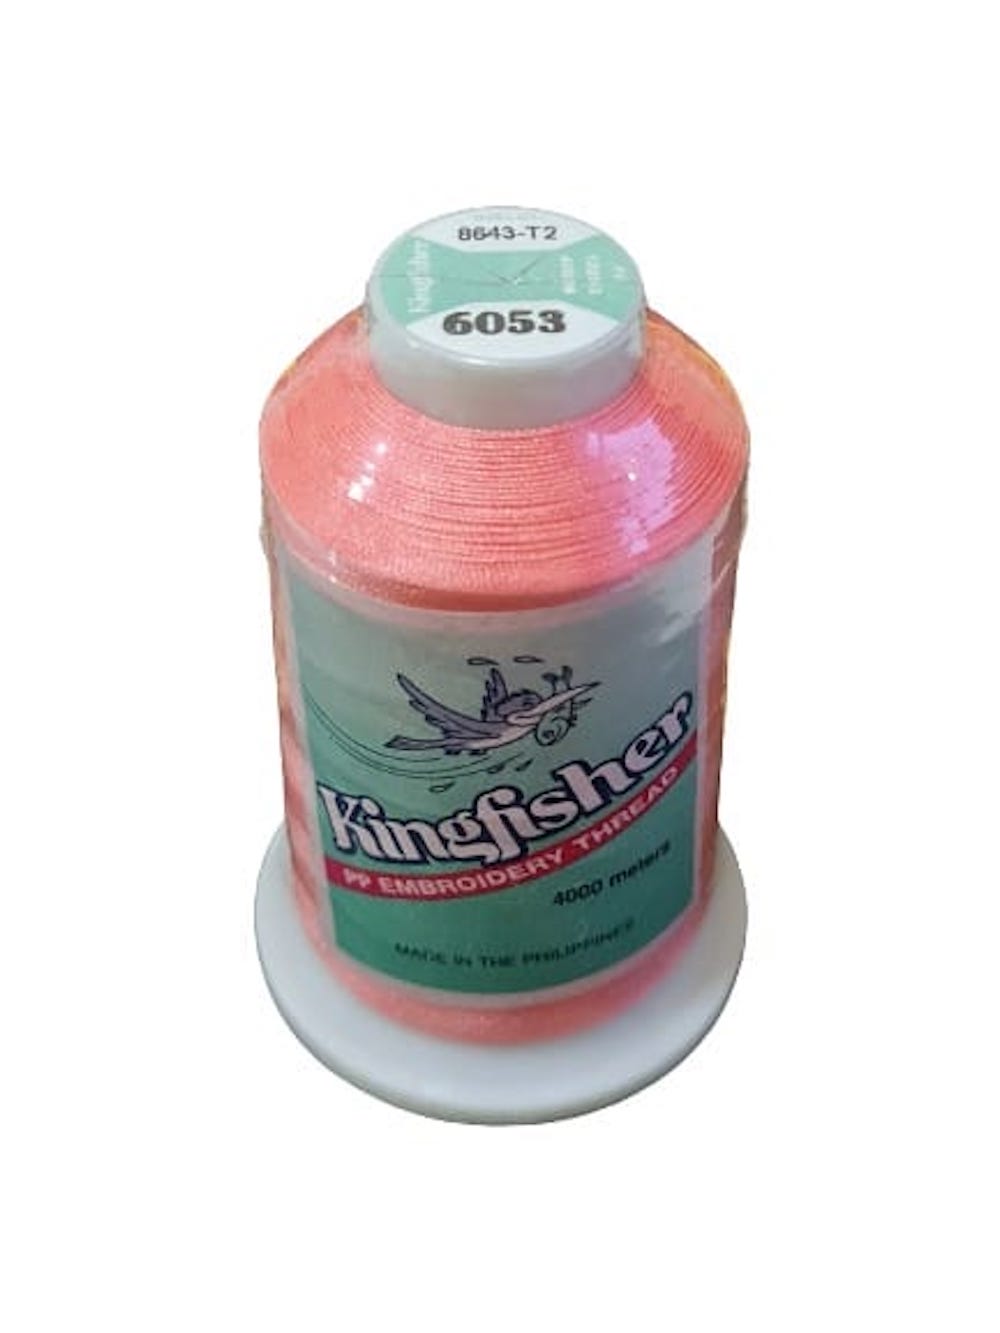 King Fisher Embroidery Thread 4000m 6053 - MY SEWING MALL